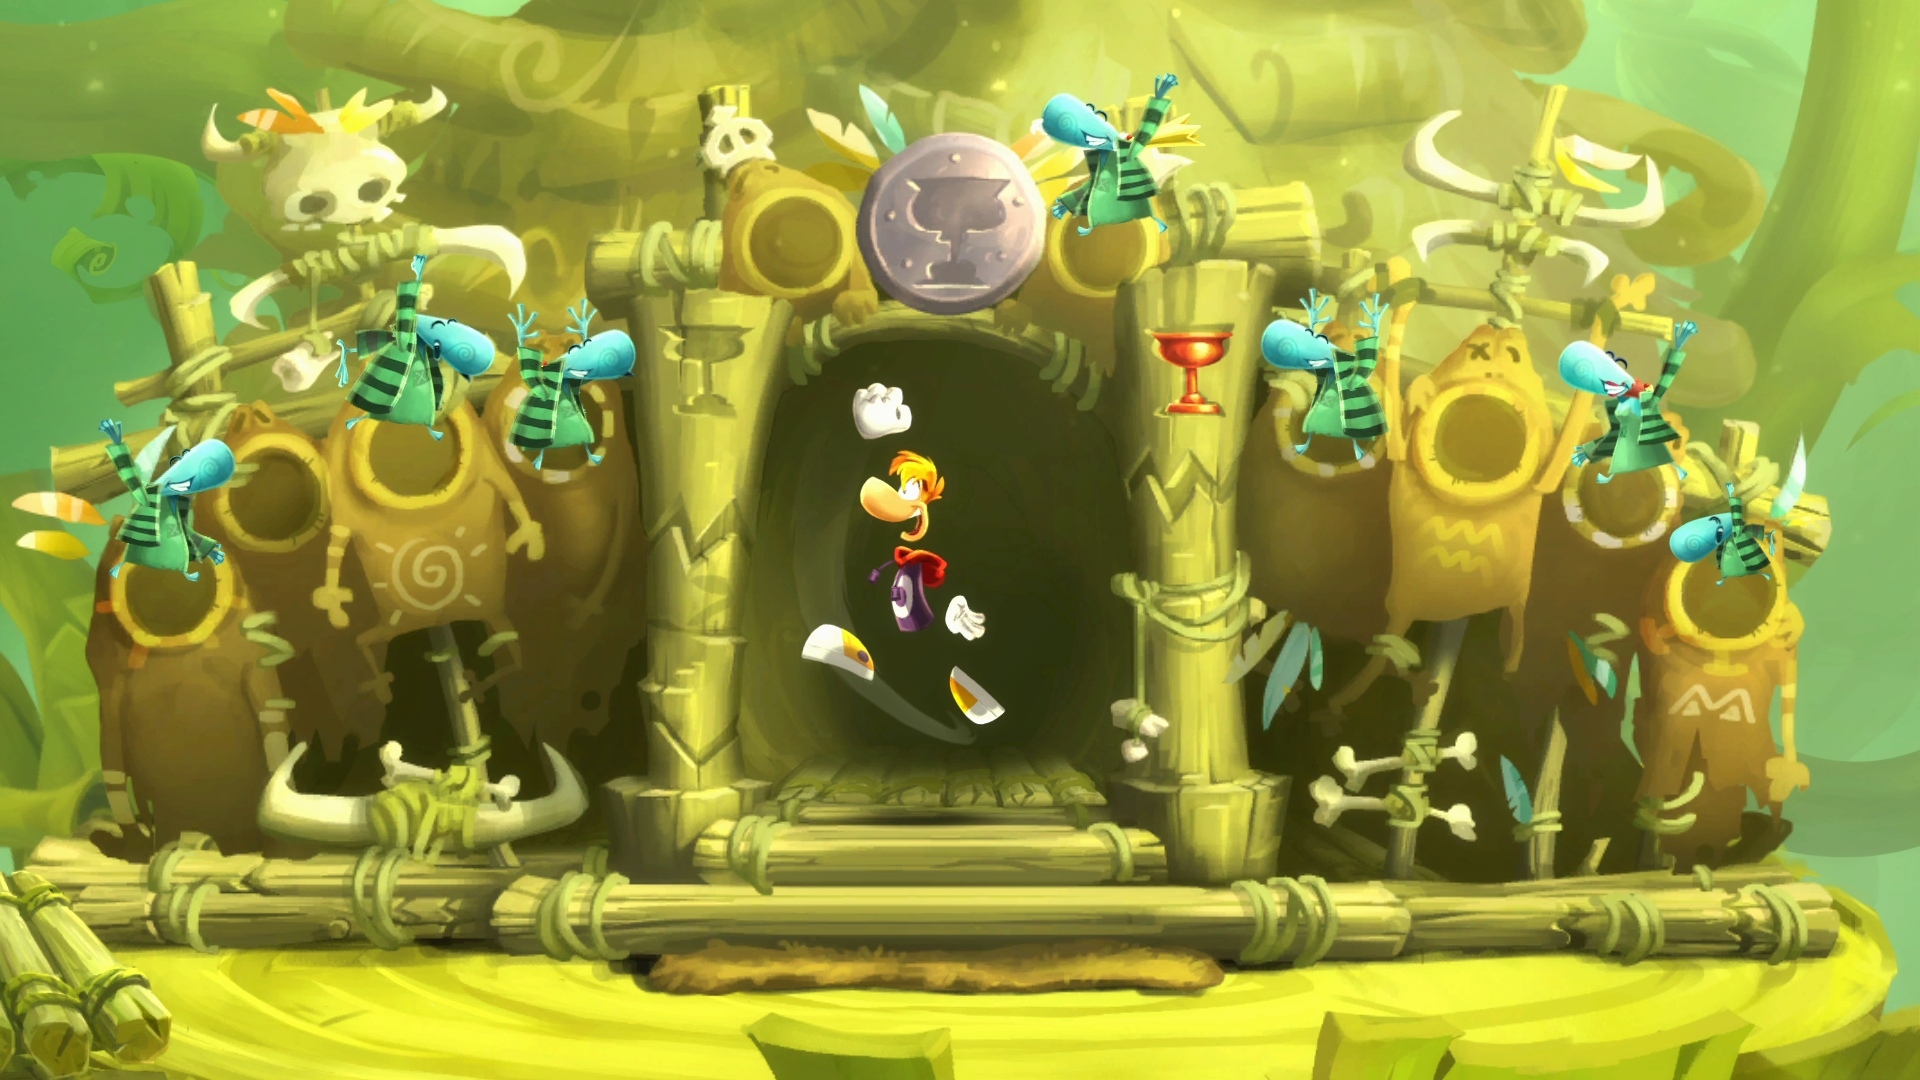 This Rayman Legends Wallpaper Is Available In Sizes